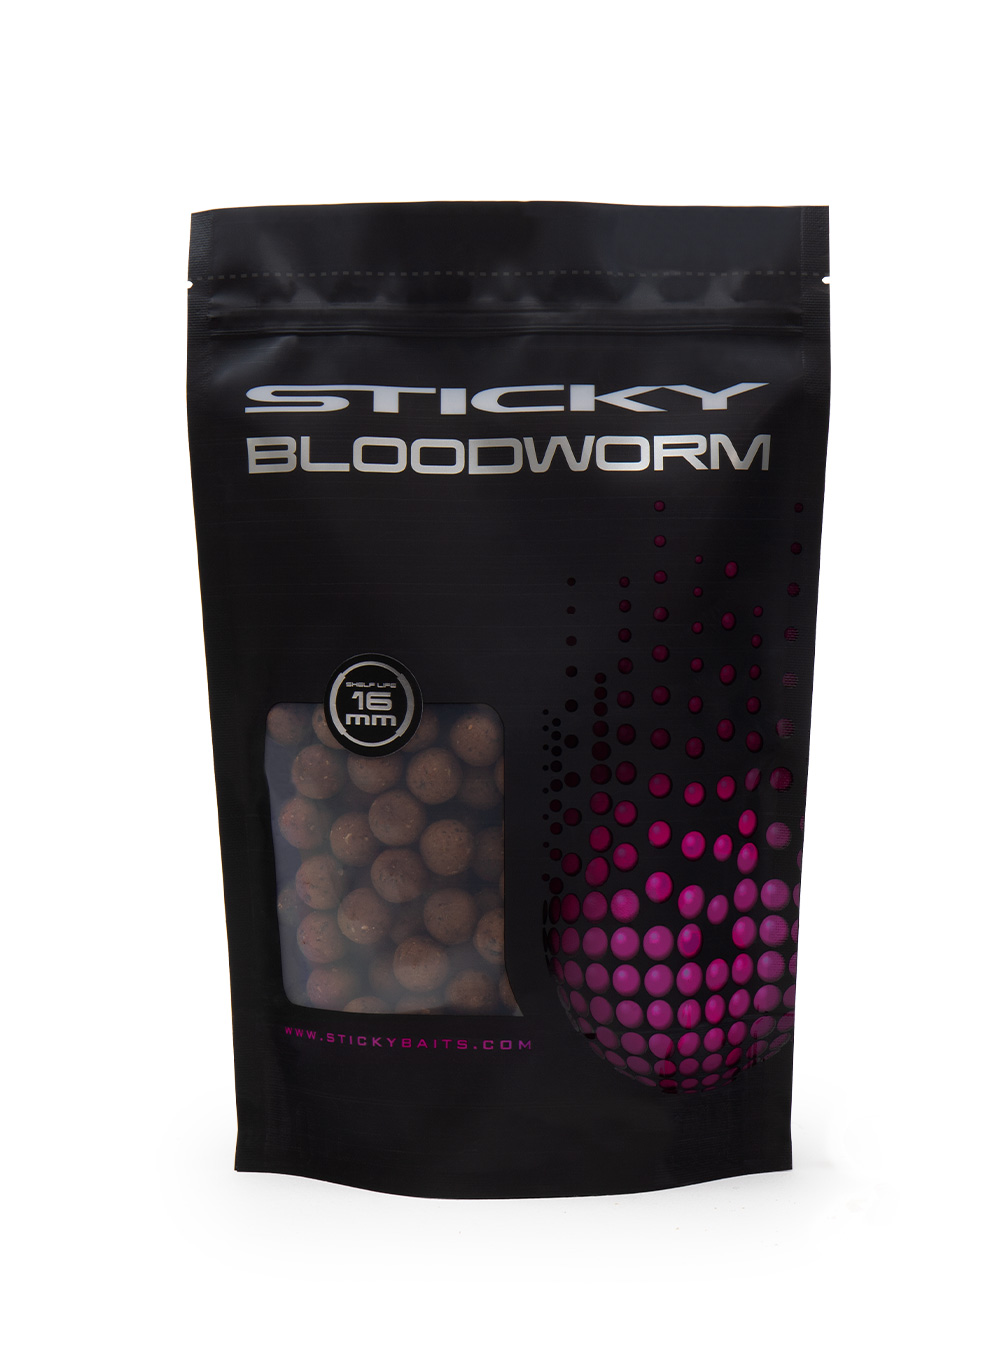 Sticky Baits Bloodworm Boiles, Pellets and Liquids